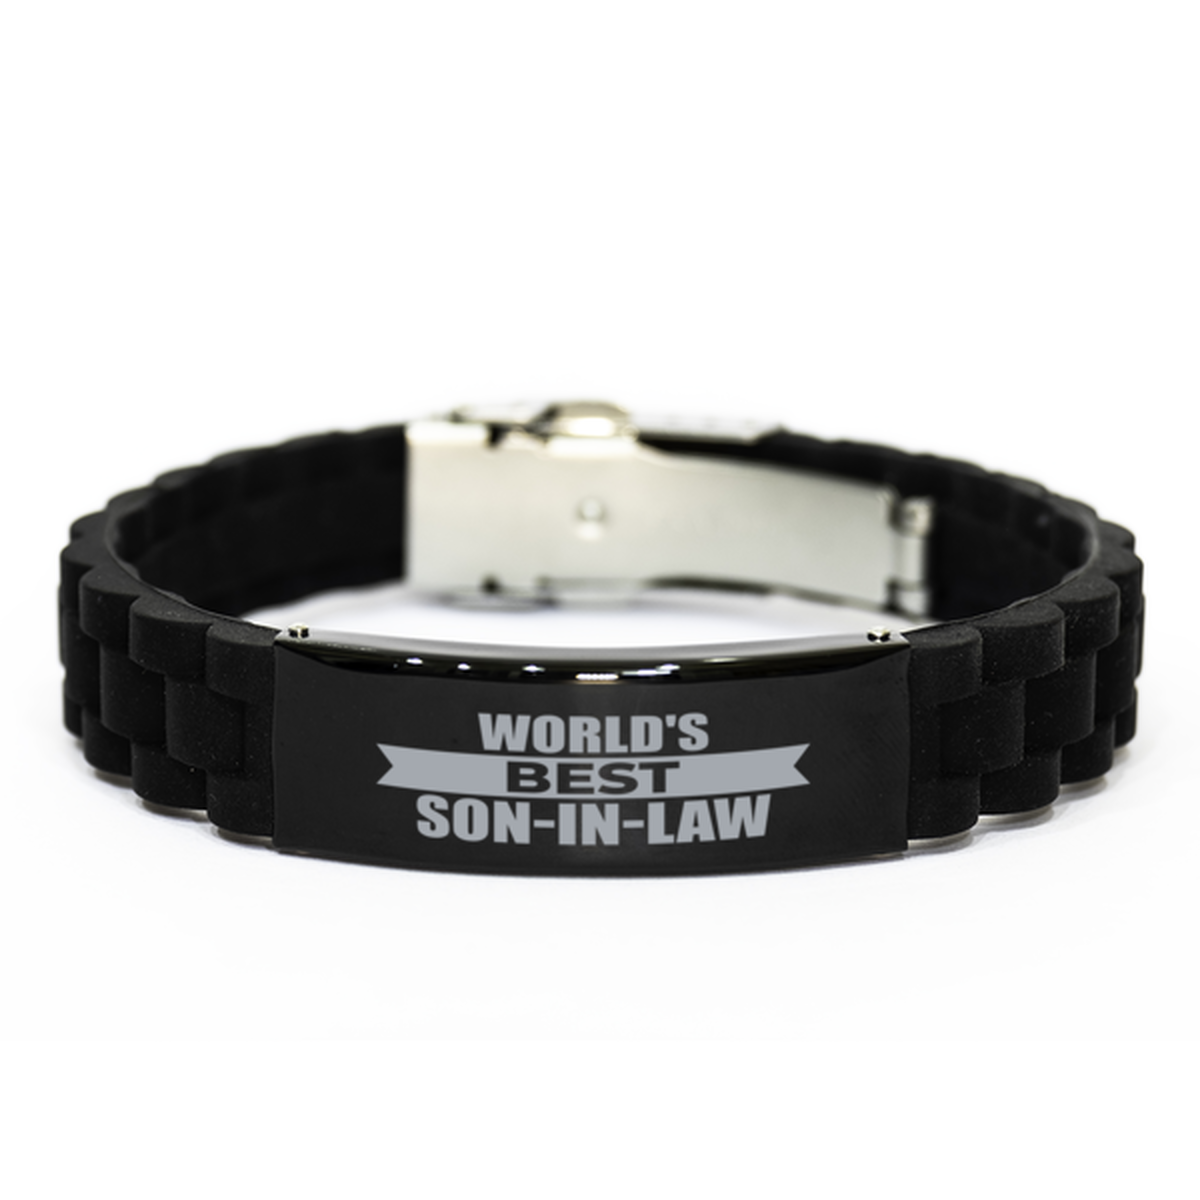 World's Best Son-in-law Gifts, Funny Black Engraved Bracelet For Son-in-law, Family Gifts For Men